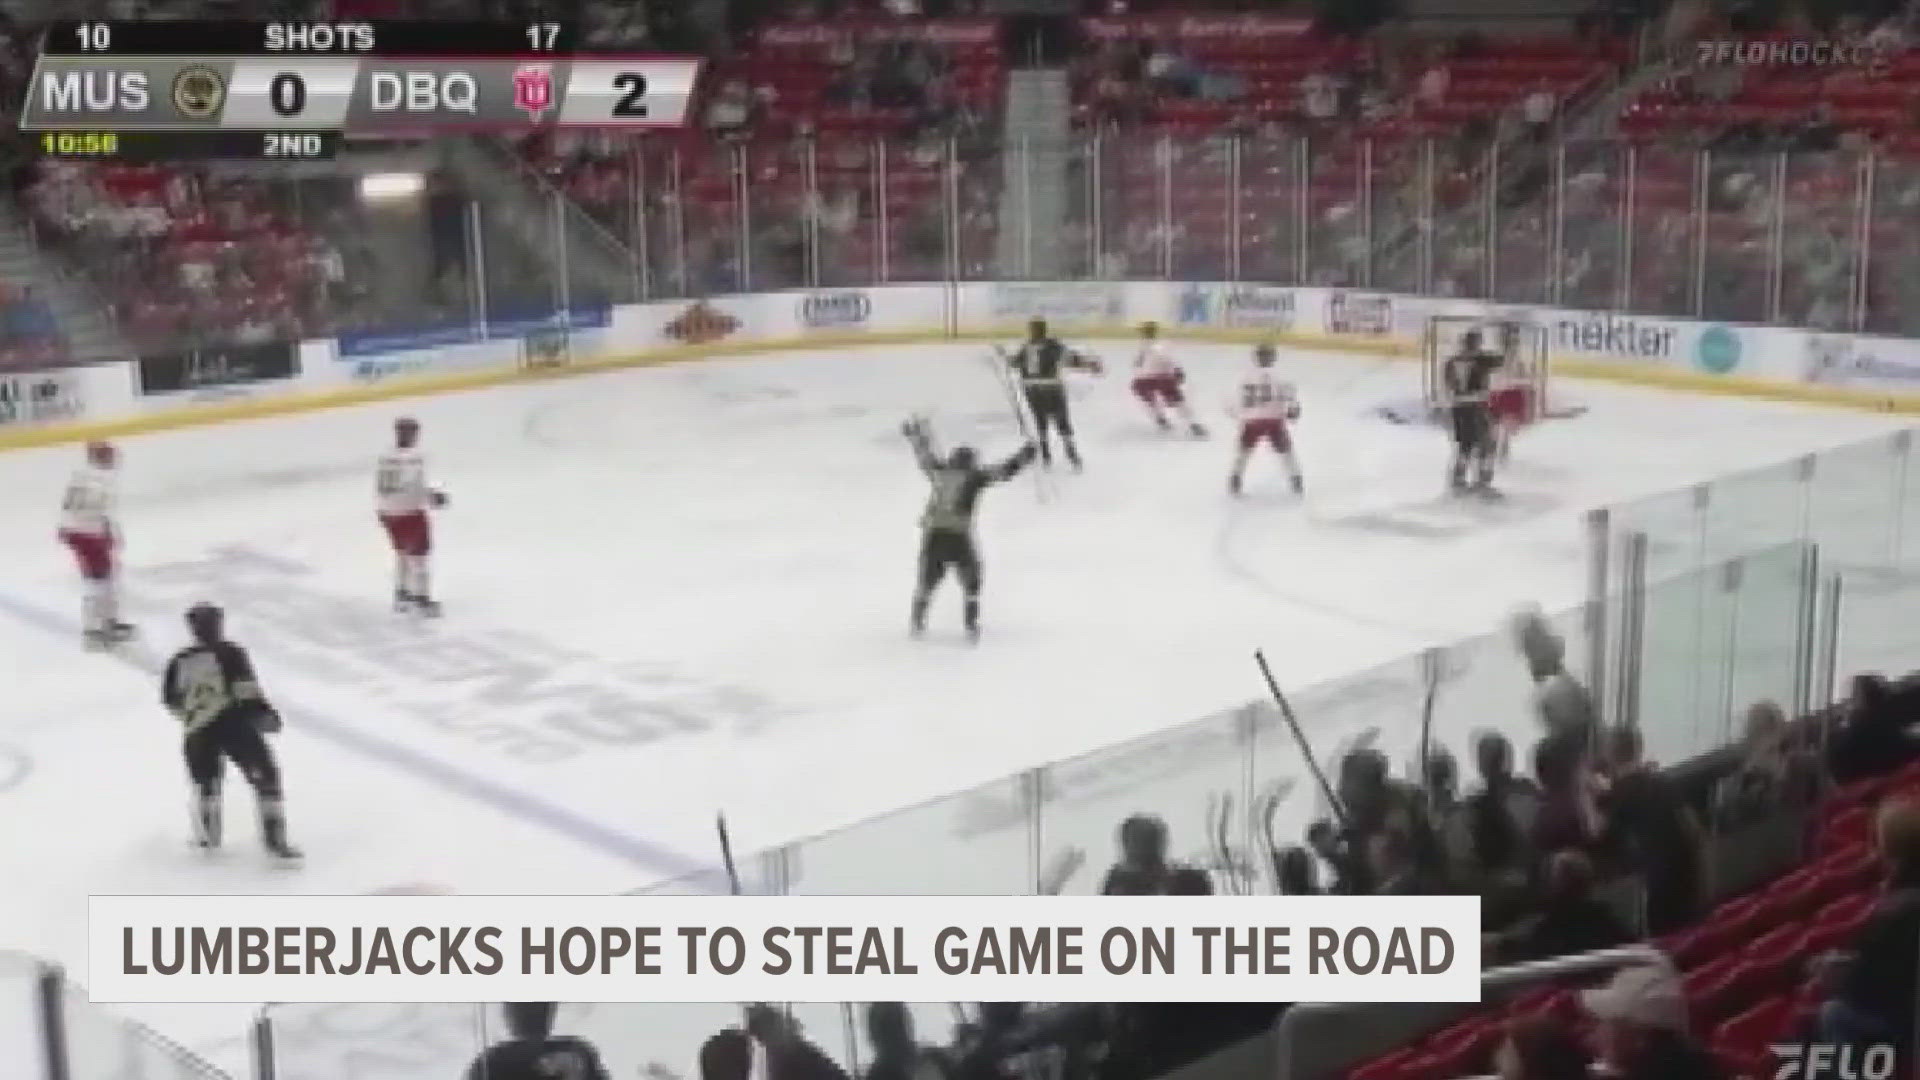 Despite dropping the first game of the series, Muskegon still feels good with where they are at in the postseason and hope they can steal game 2 on the road tonight.